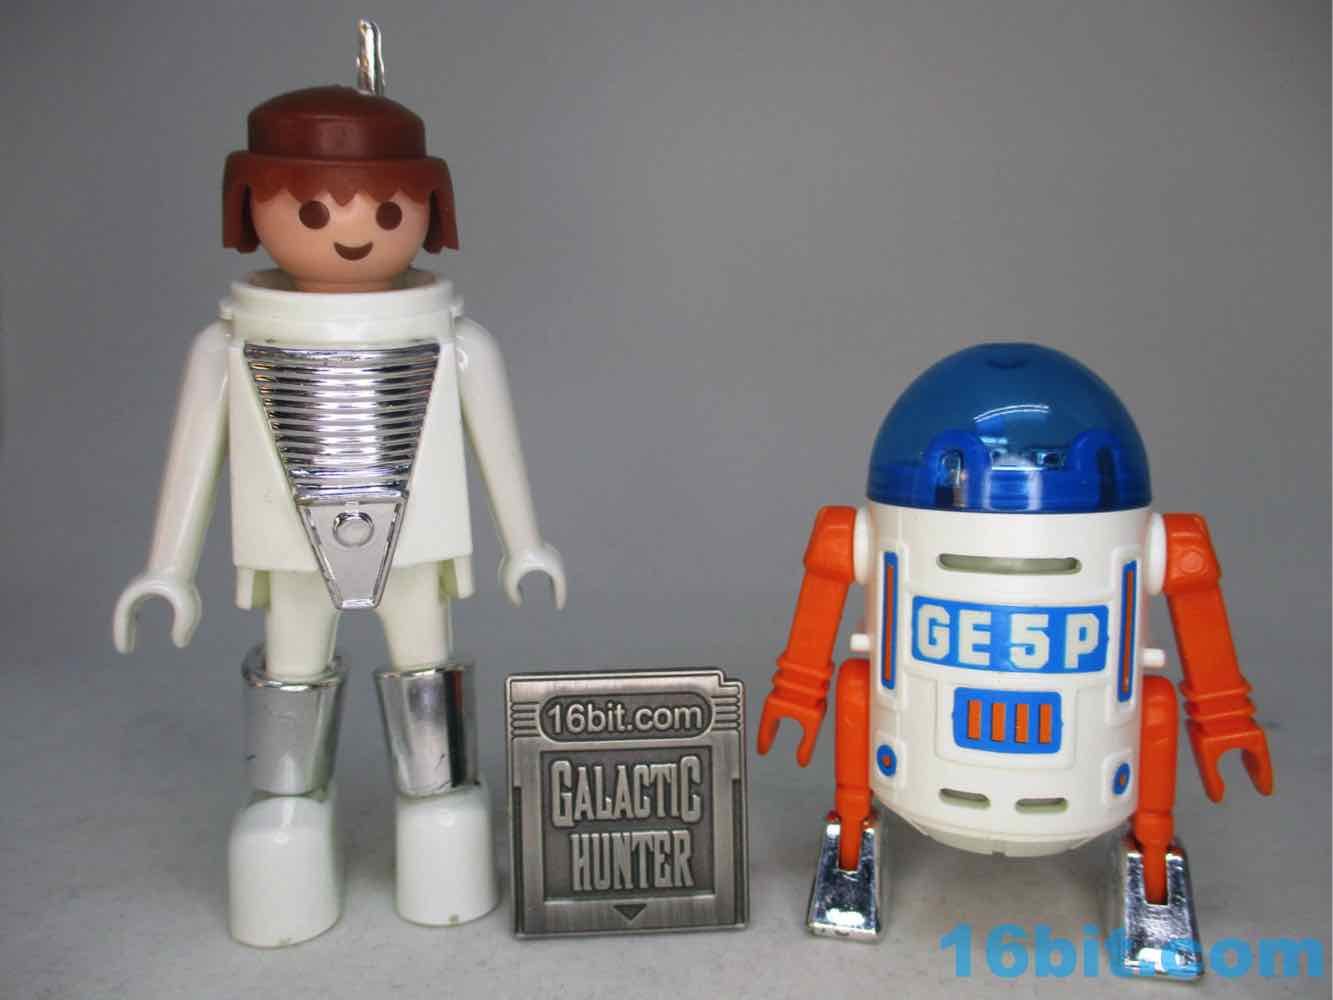 Classic 1980s Toy Playmospace Playmobil Space